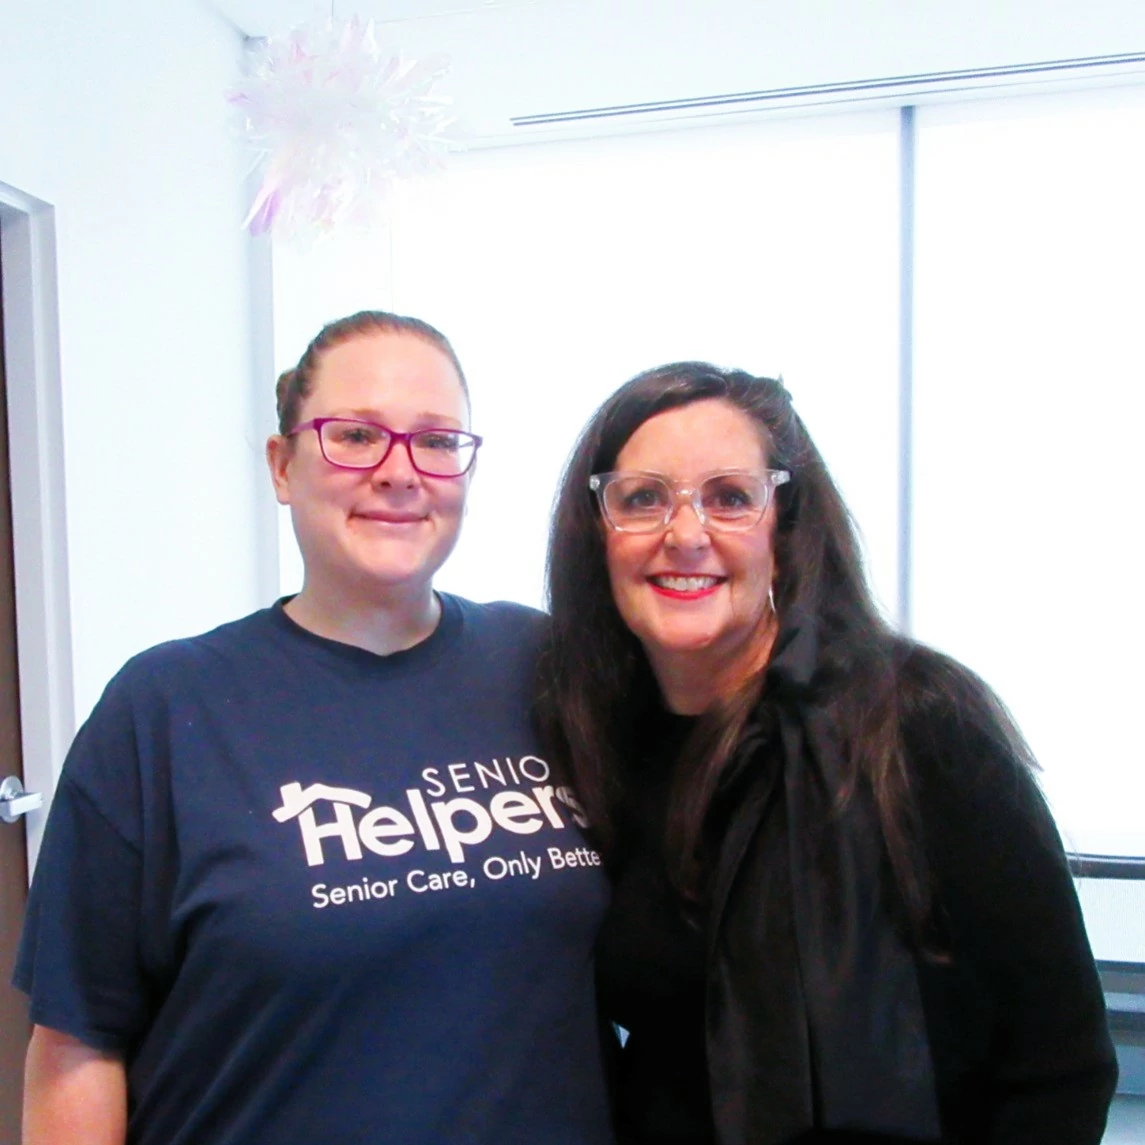 Aubrie Depkin, Executive Director at Senior Helpers Orlando (left), and Jana Ricci, Innovative Projects and Business Development Coordinator (right) at Senior Helpers Orlando.